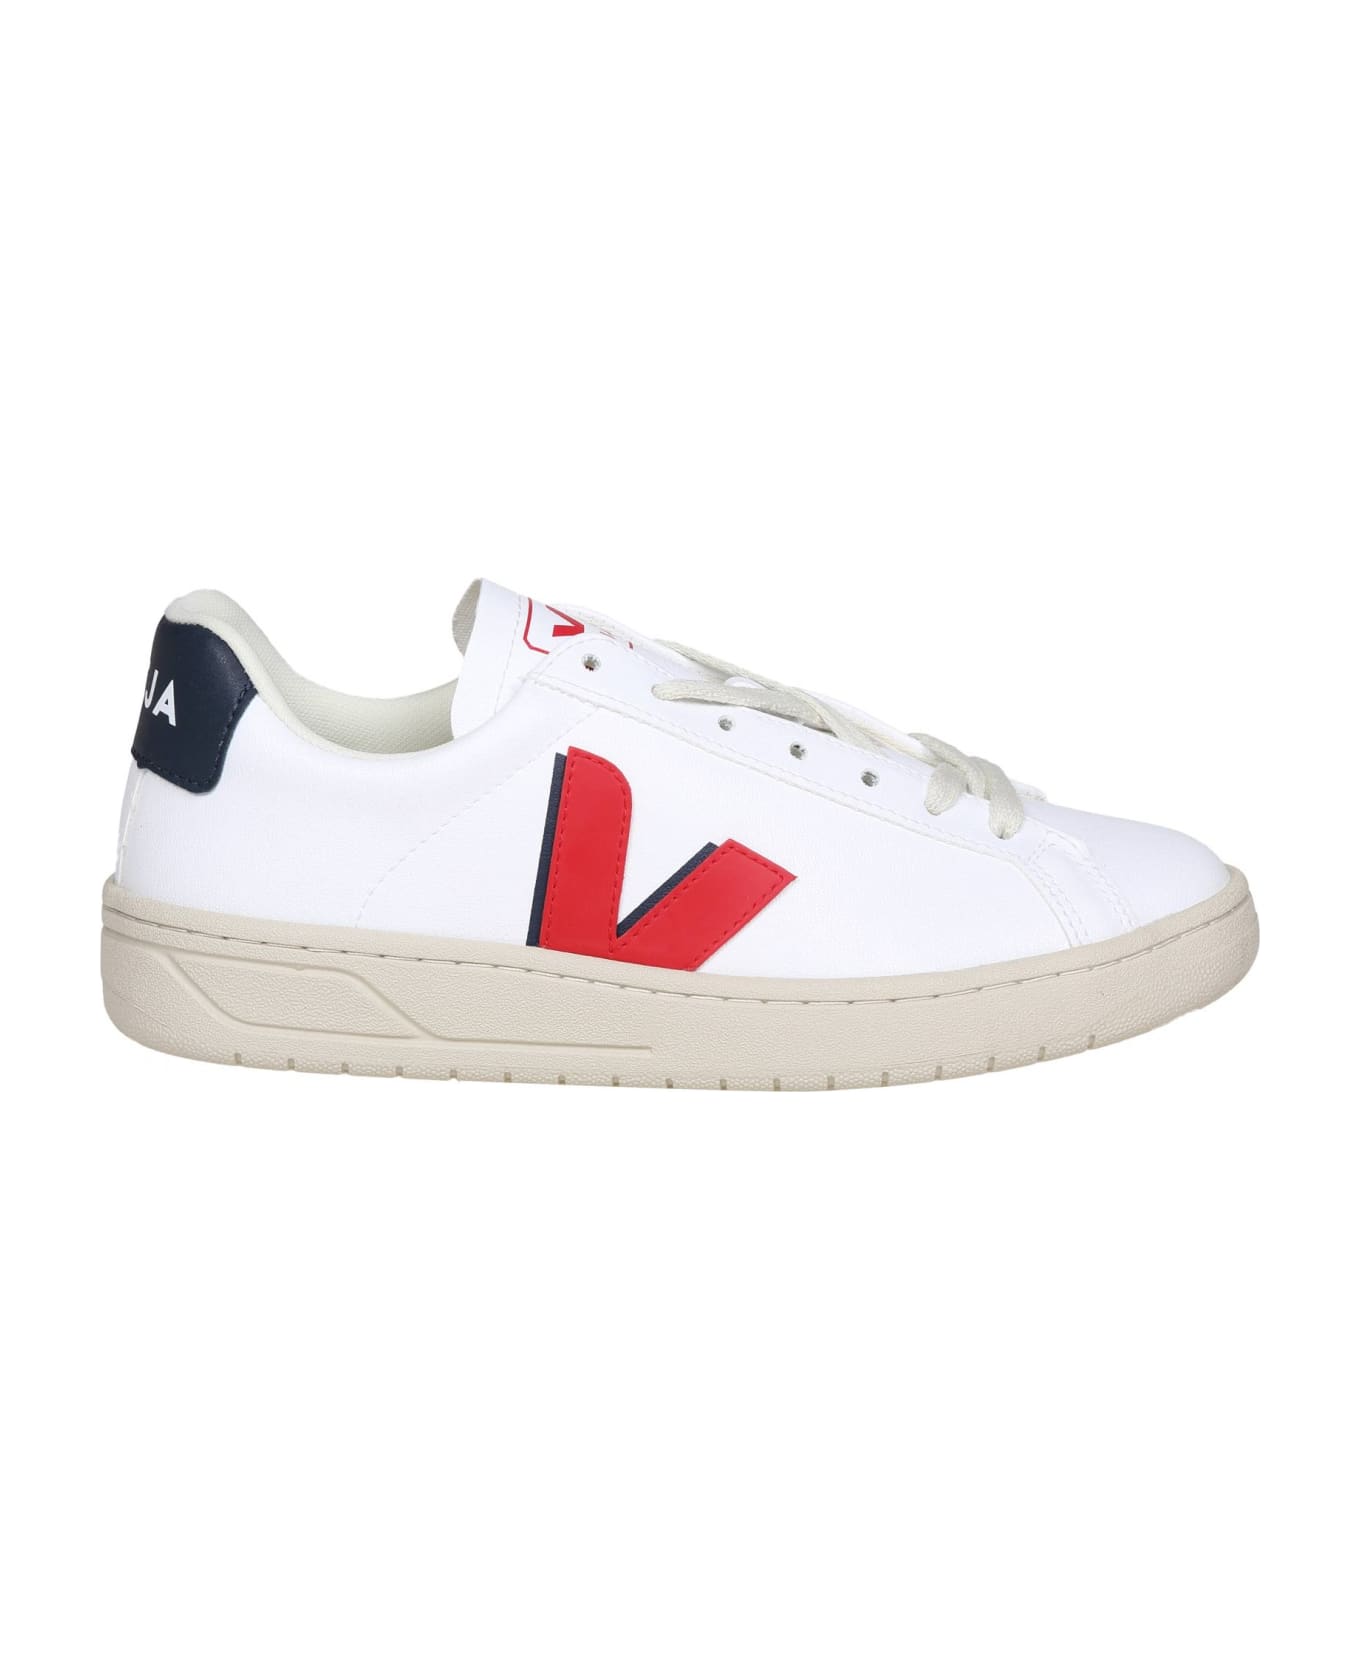 Veja Campo Chromefree In White/red Leather - White/red